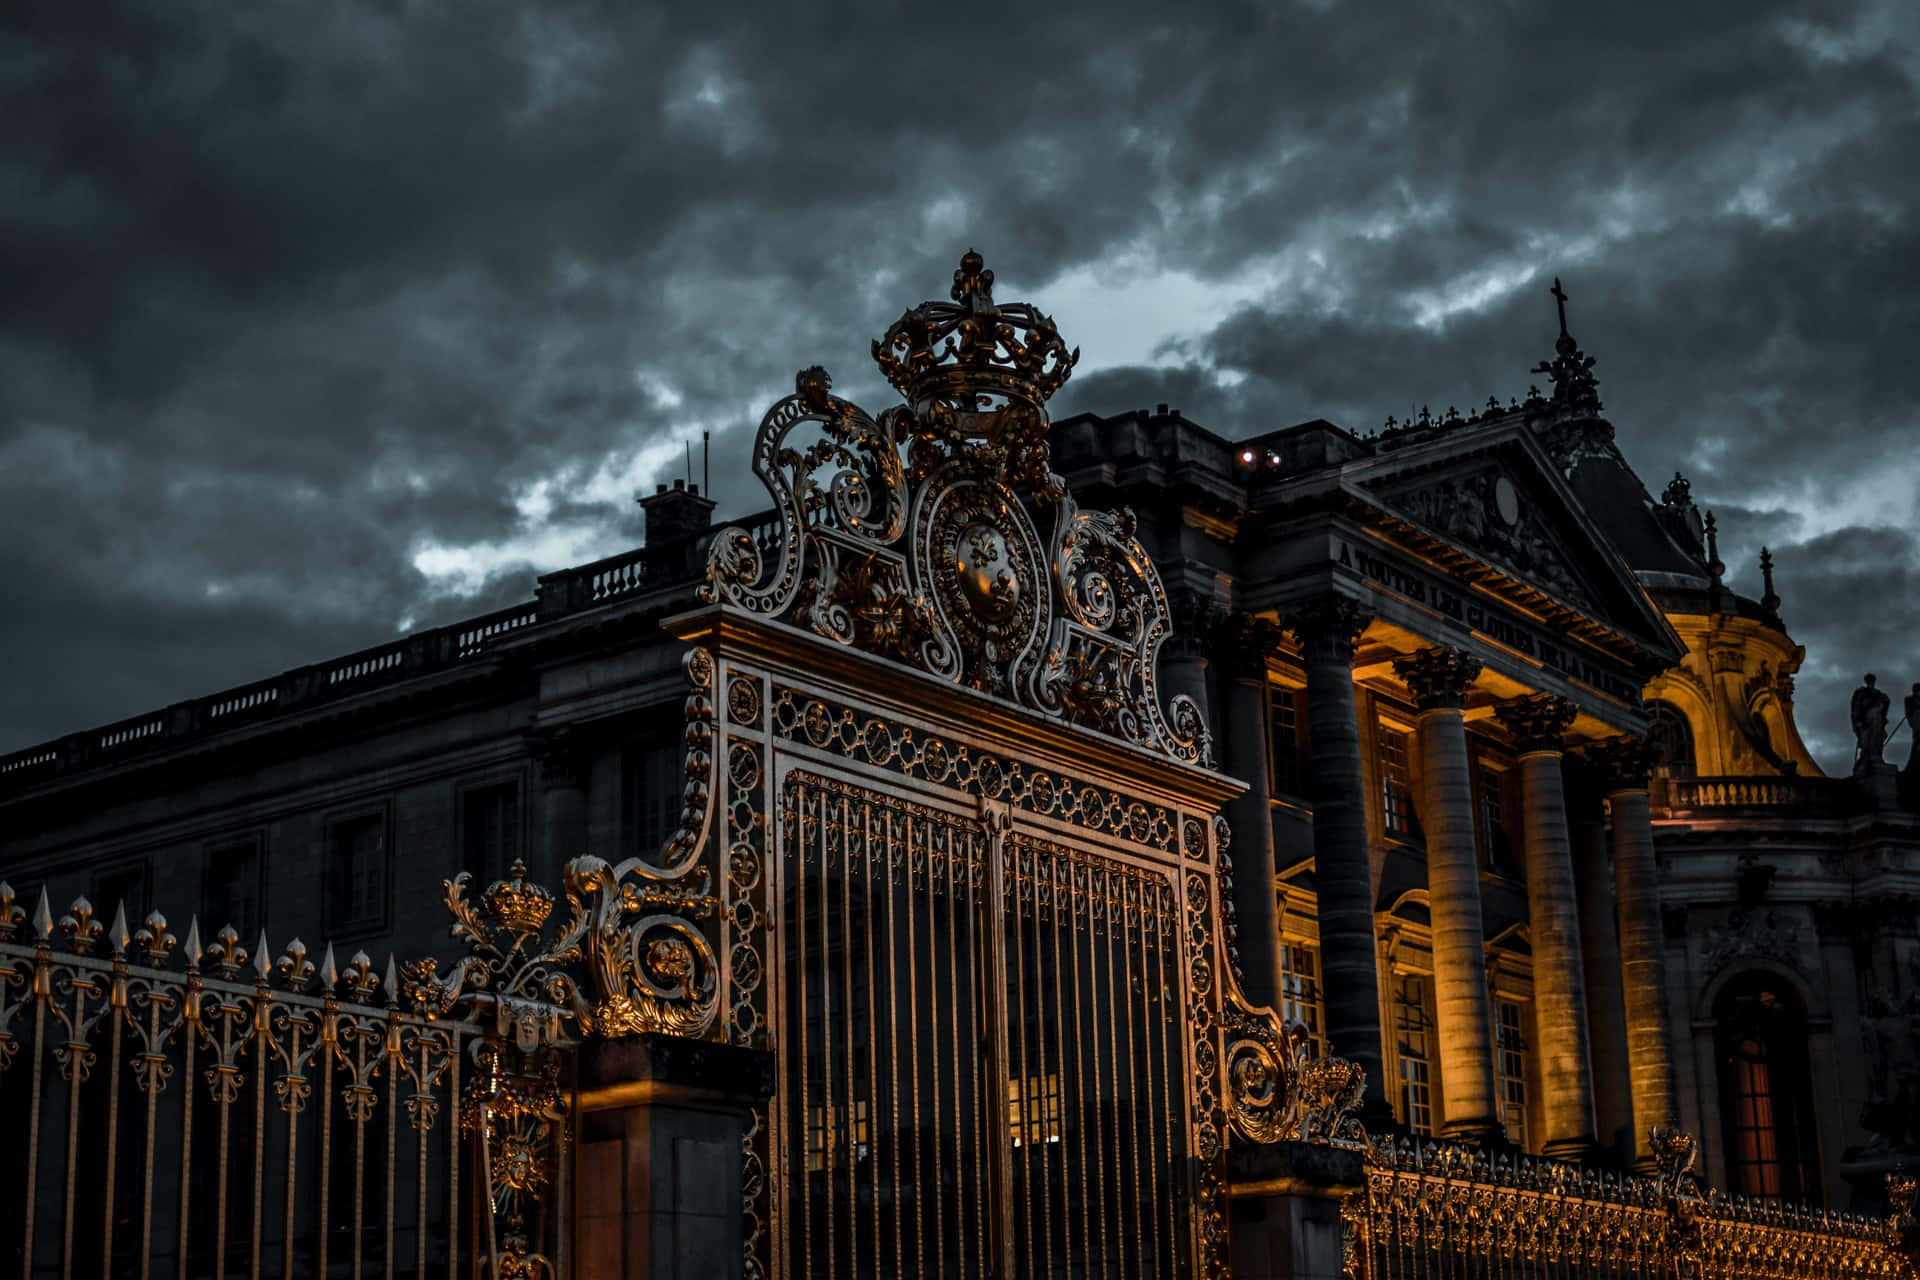 Ornate_ Palace_ Gate_ Under_ Cloudy_ Skies Wallpaper